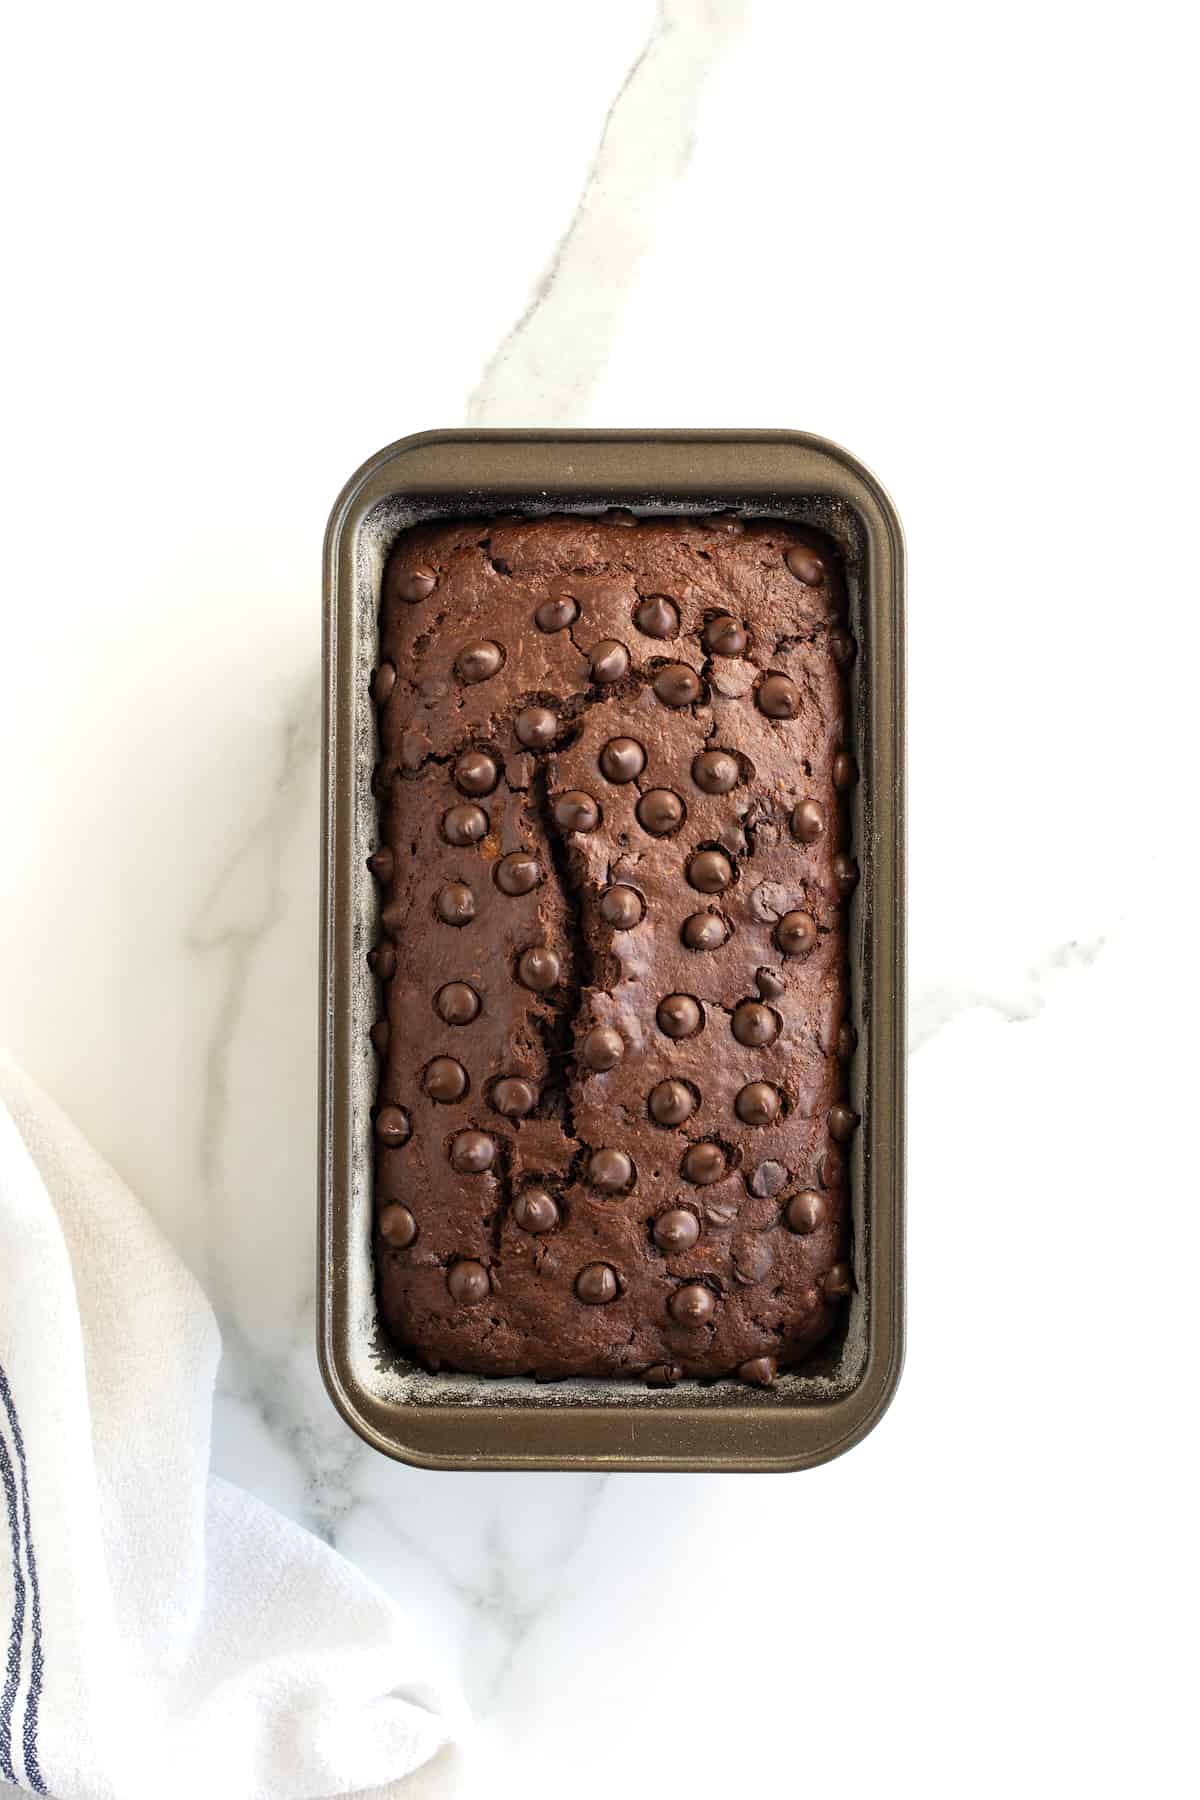 A baked loaf of chocolate banana bread in a metal loaf pan topped with chocolate chips with a crack down the middle.